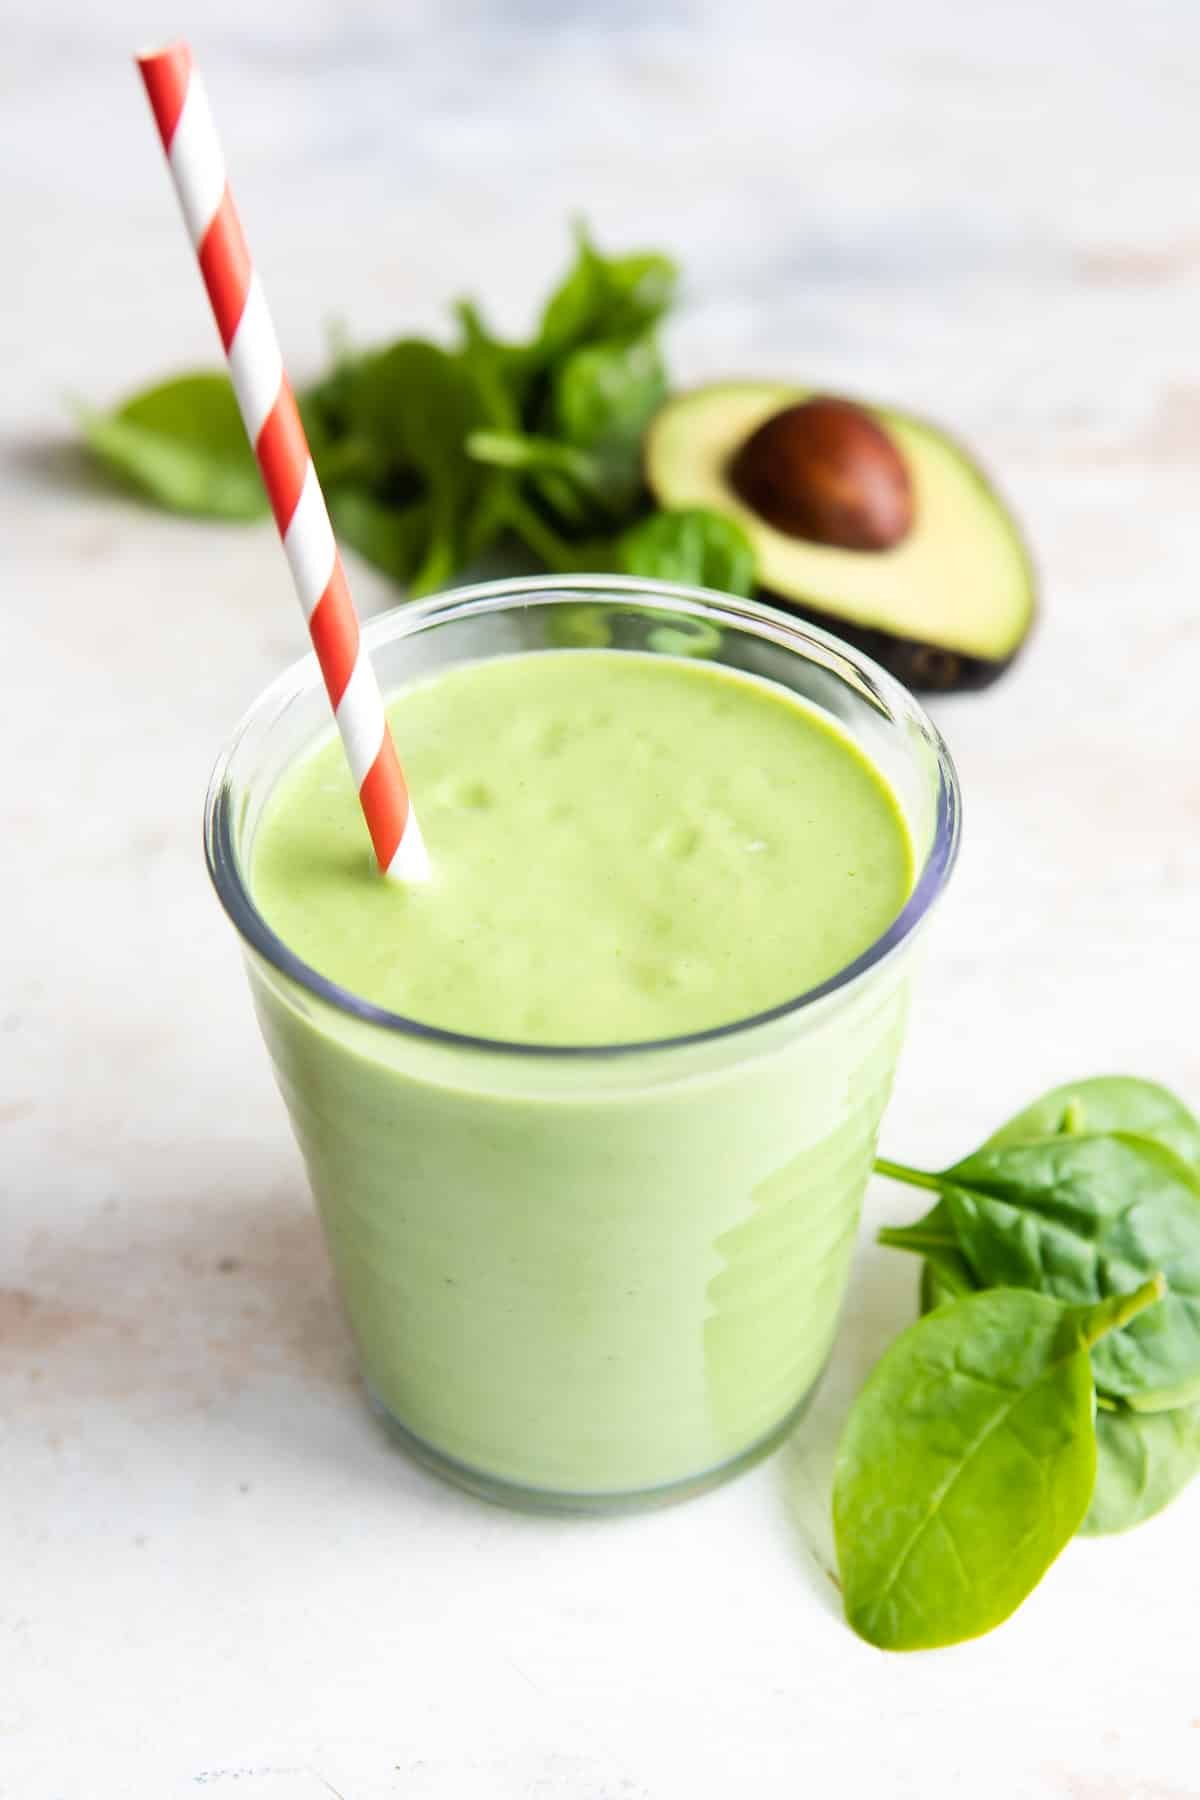 A glass of avocado smoothie next to a pile of spinach and half of an avocado.